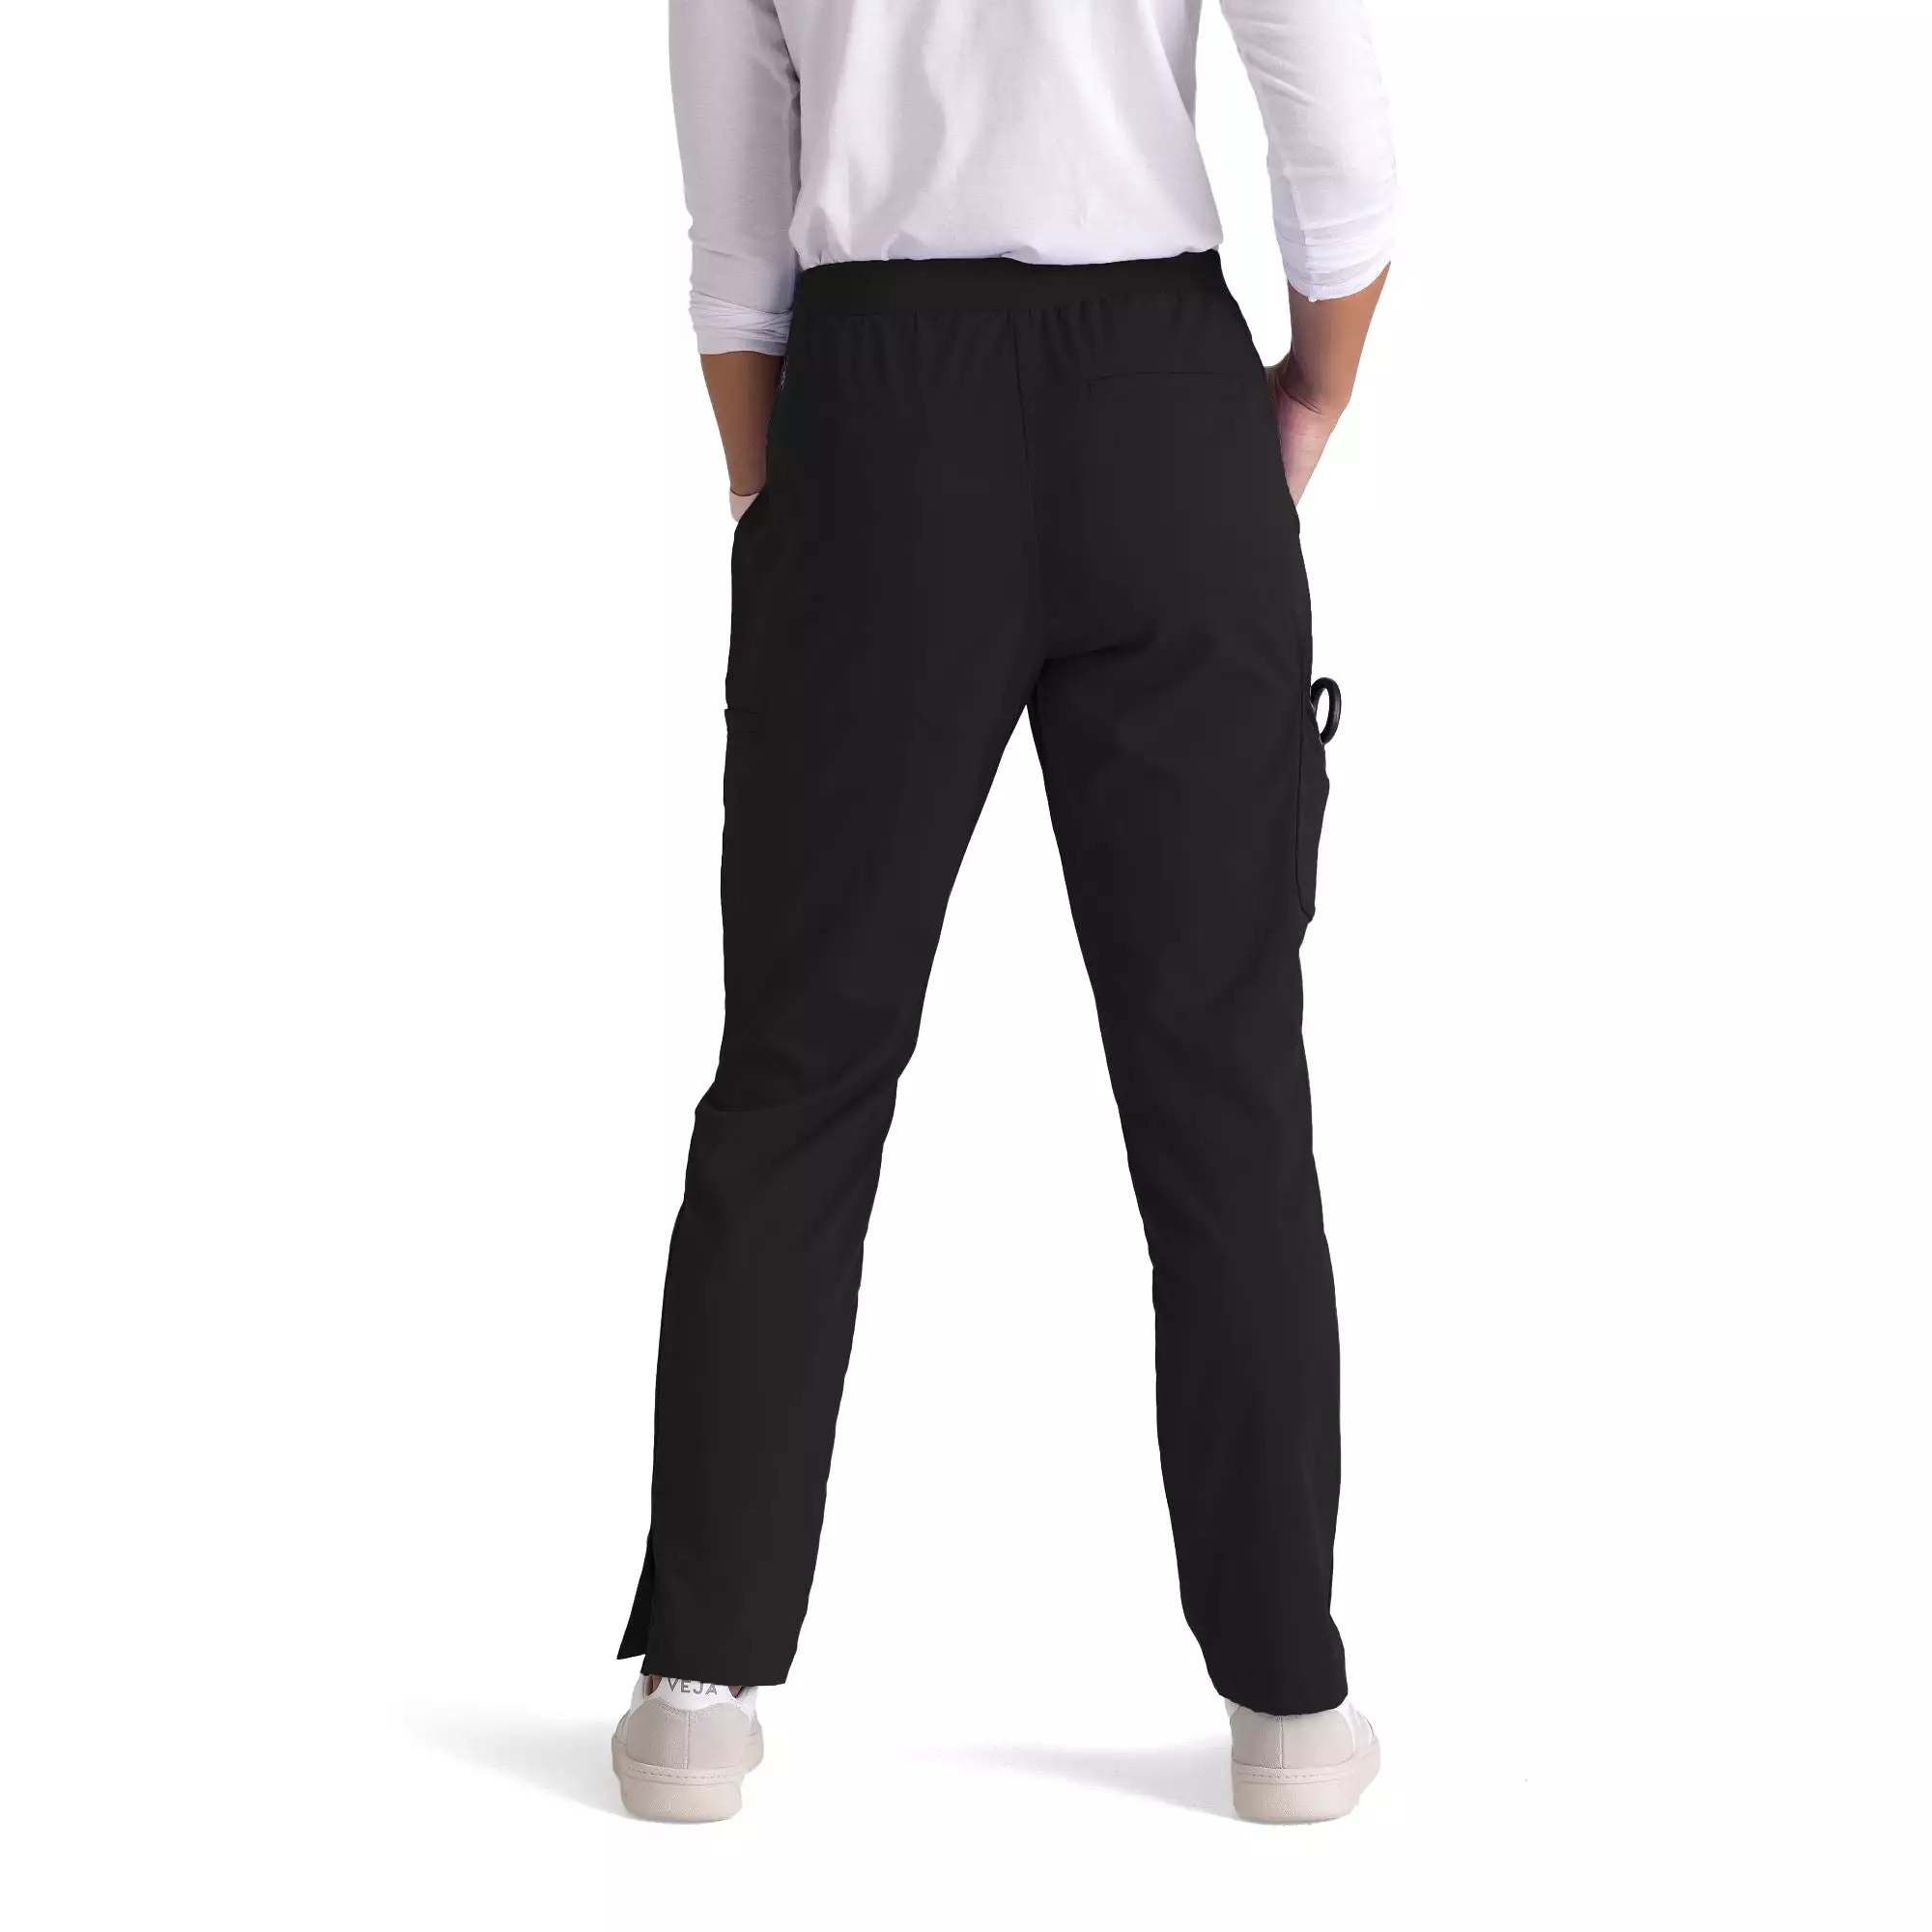 Barco Grey's Anatomy +SpandexStretch GRSP526 Serena Tapered Pant - TALL